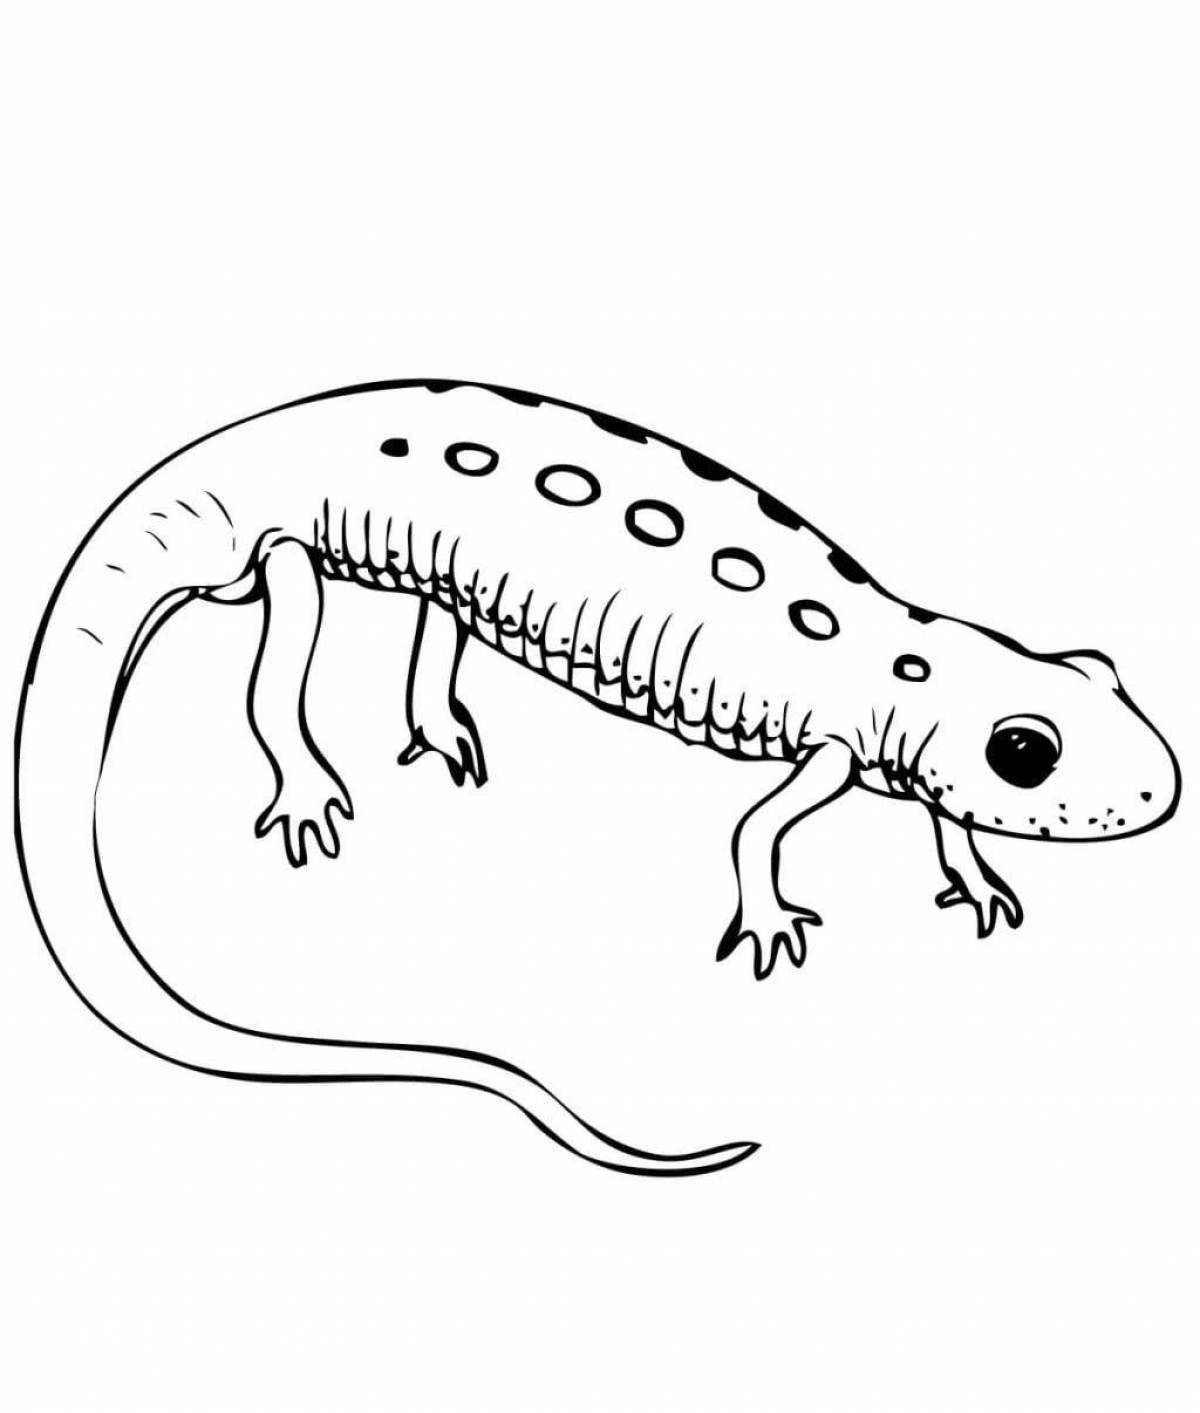 Greater common newt coloring page